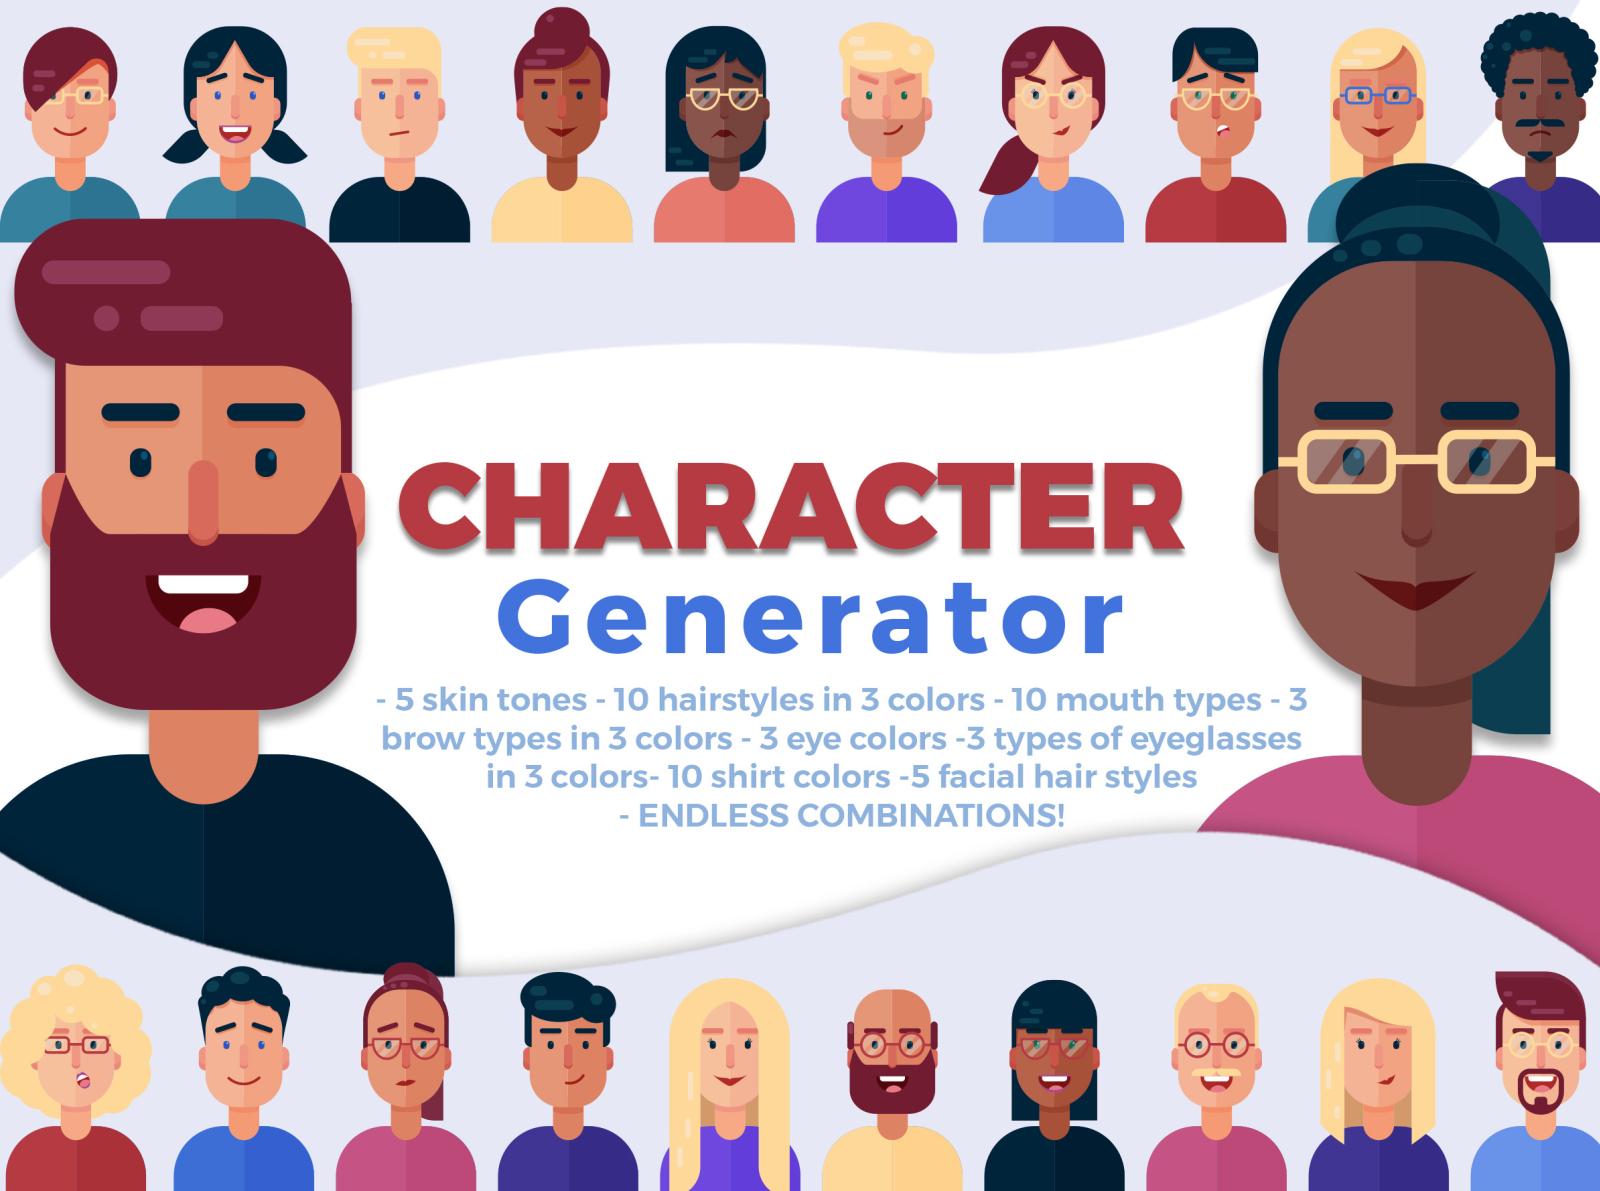  Online Vector Avatars Generator for Your Site